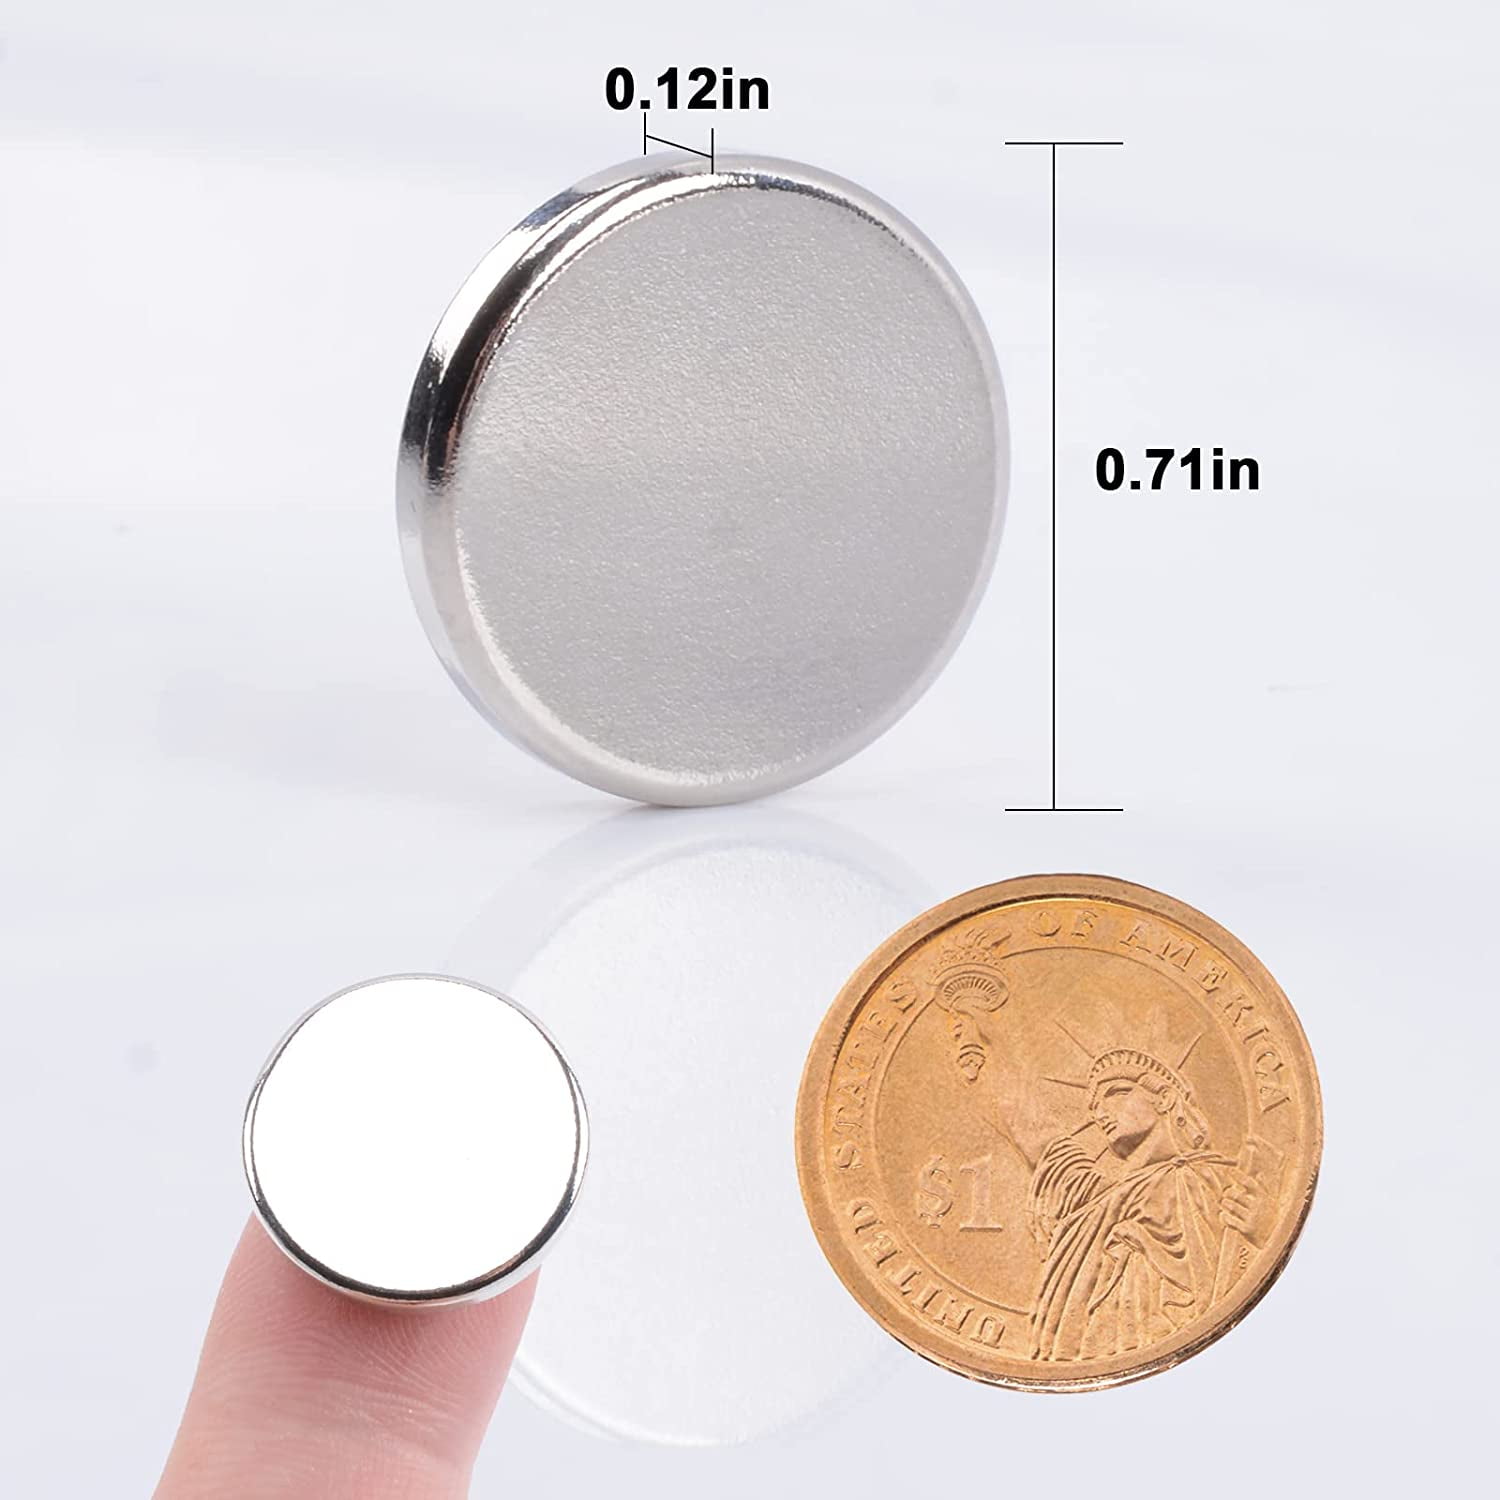 4mm dia x 3mm thick Small Neodymium Disk Magnets N35 Strong Round Rare  Earth Powerful Magnet Sale for Crafts - BUYNEOMAGNETS